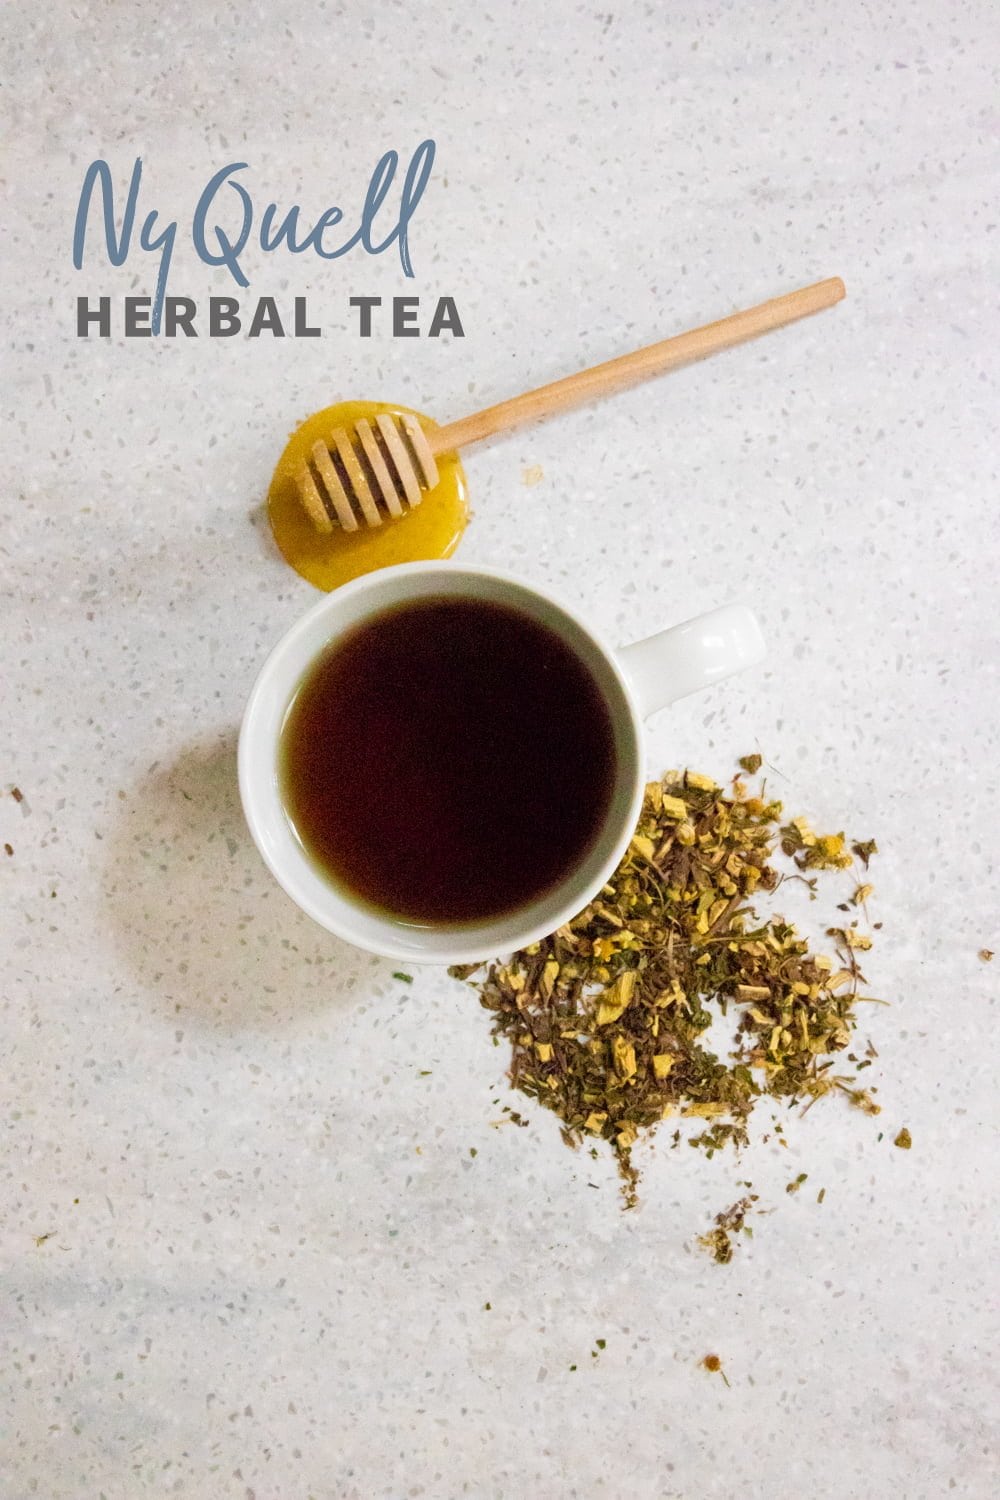 Overhead shot of tea in a white teacup, with herbs and a honey dipper nearby. Text overlay reads "NyQuell Herbal Tea."